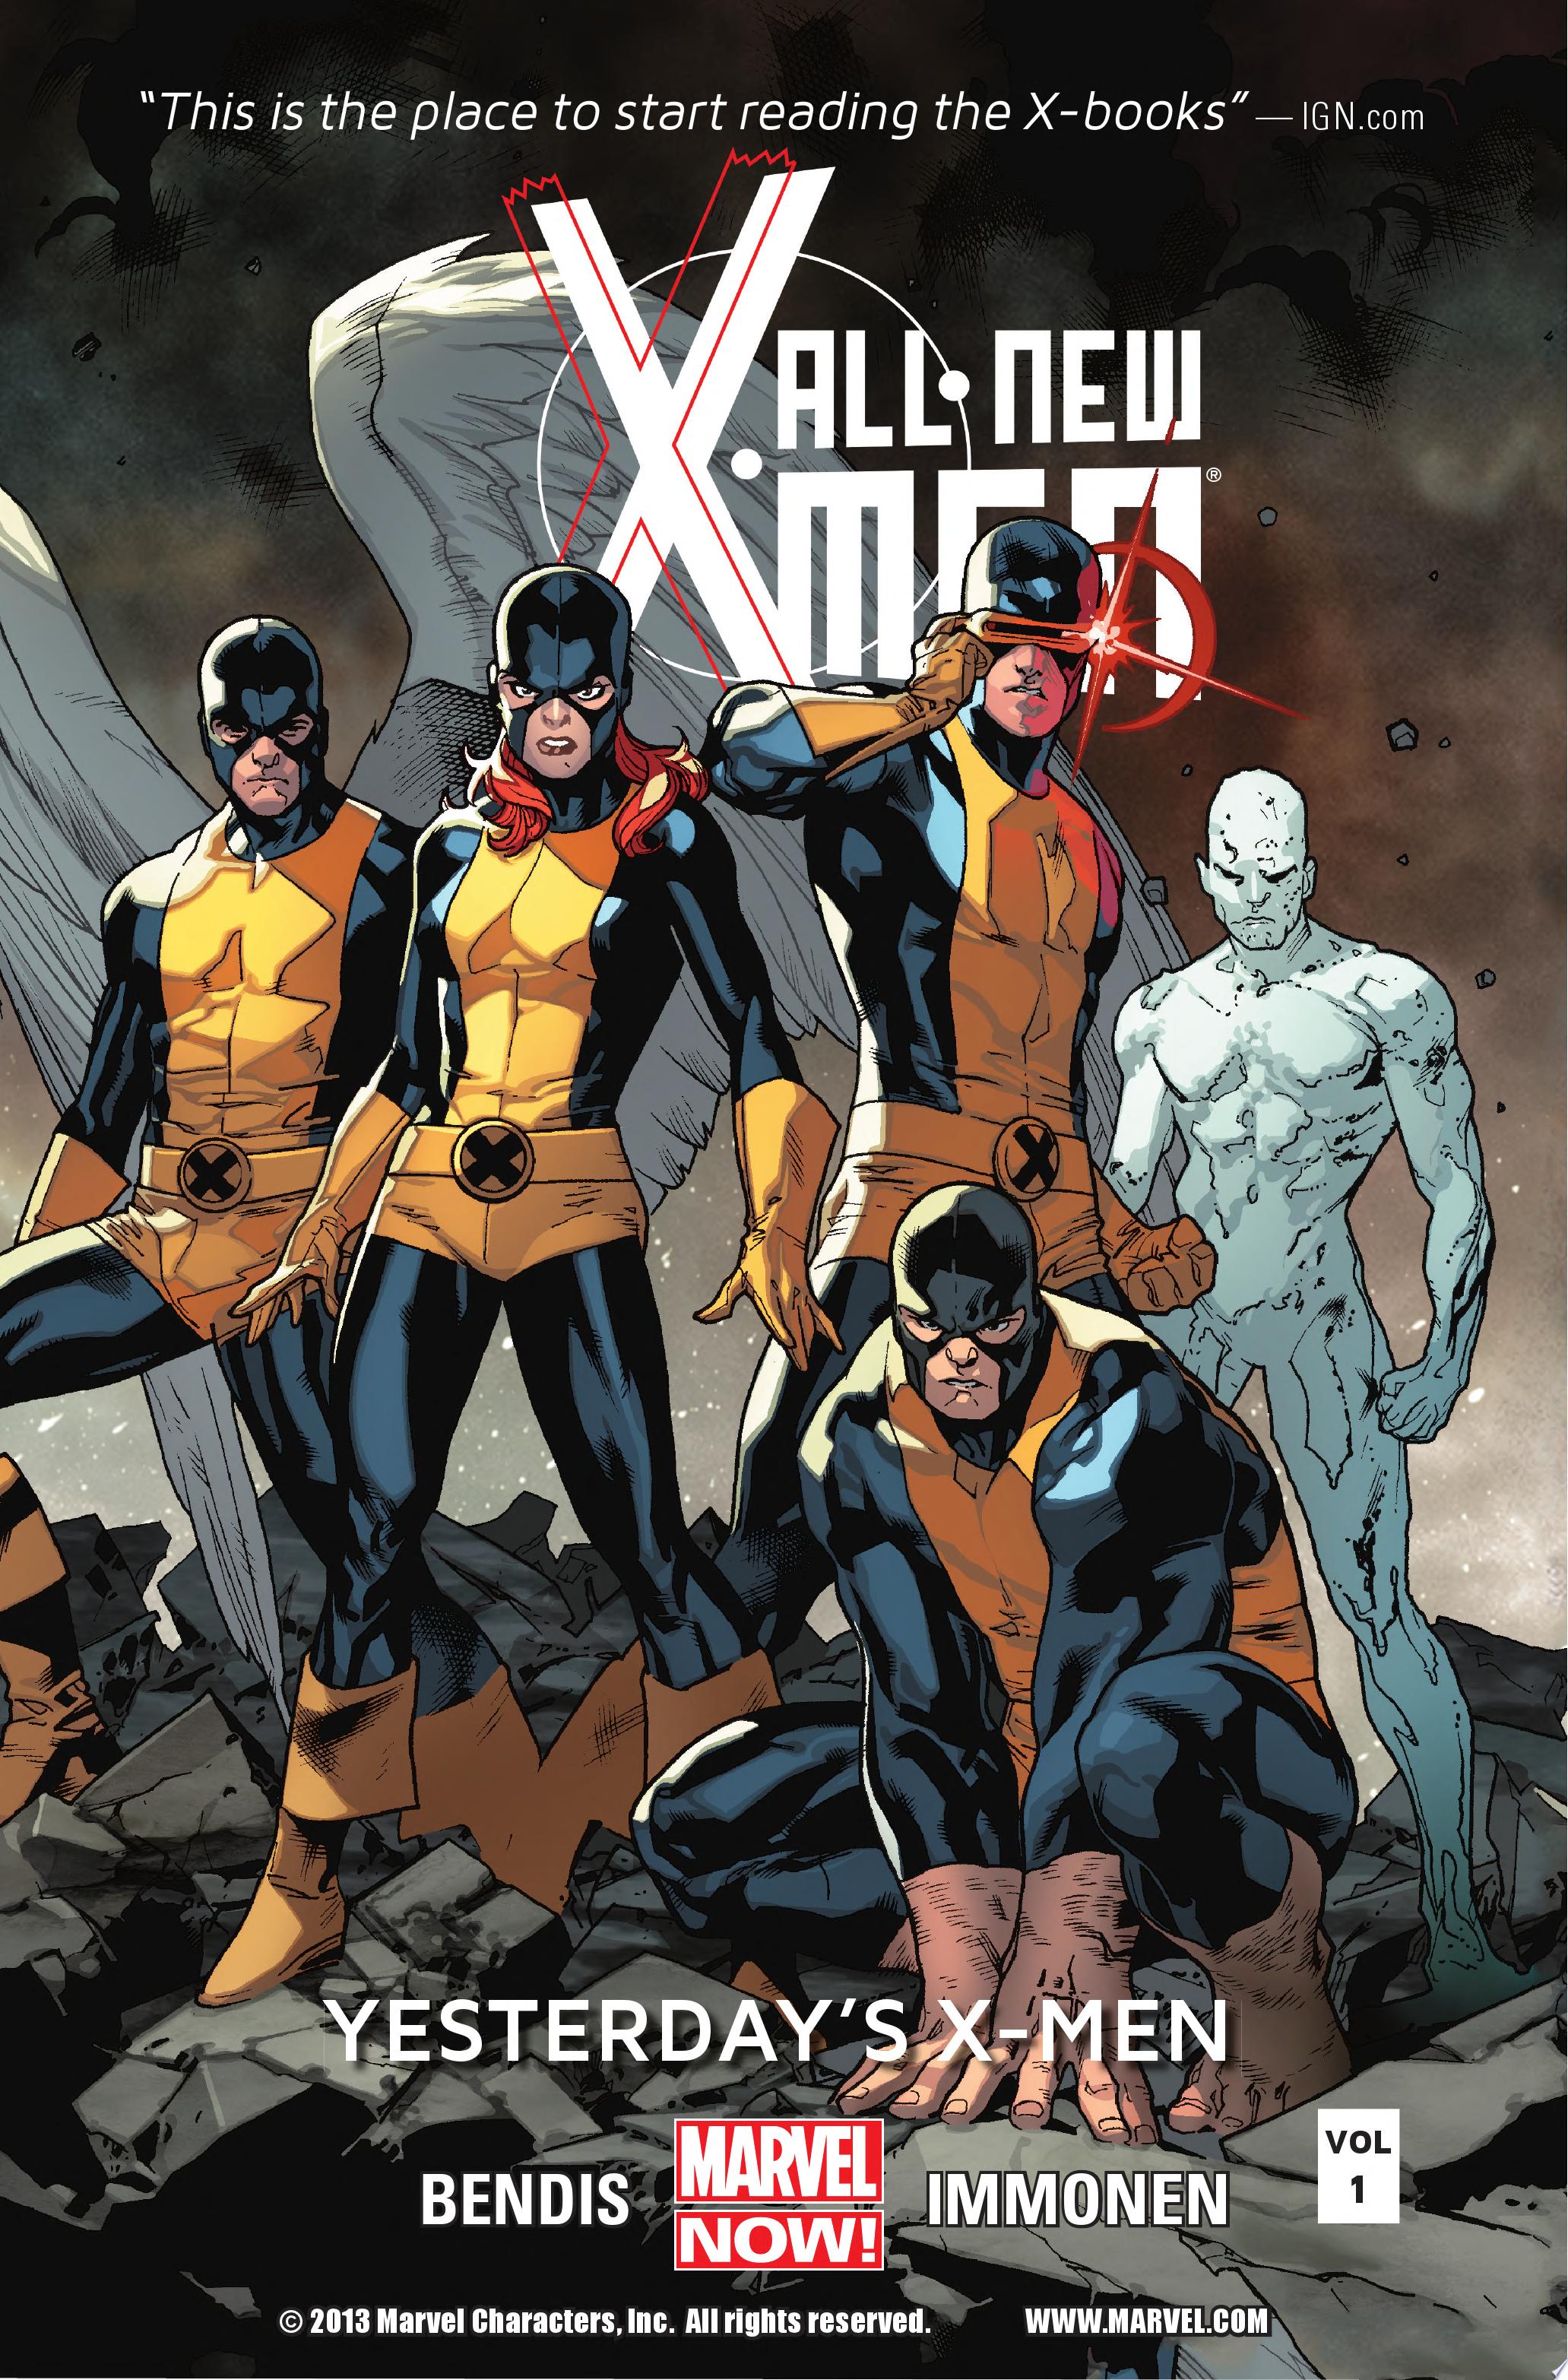 Image for "All-New X-Men Vol. 1"